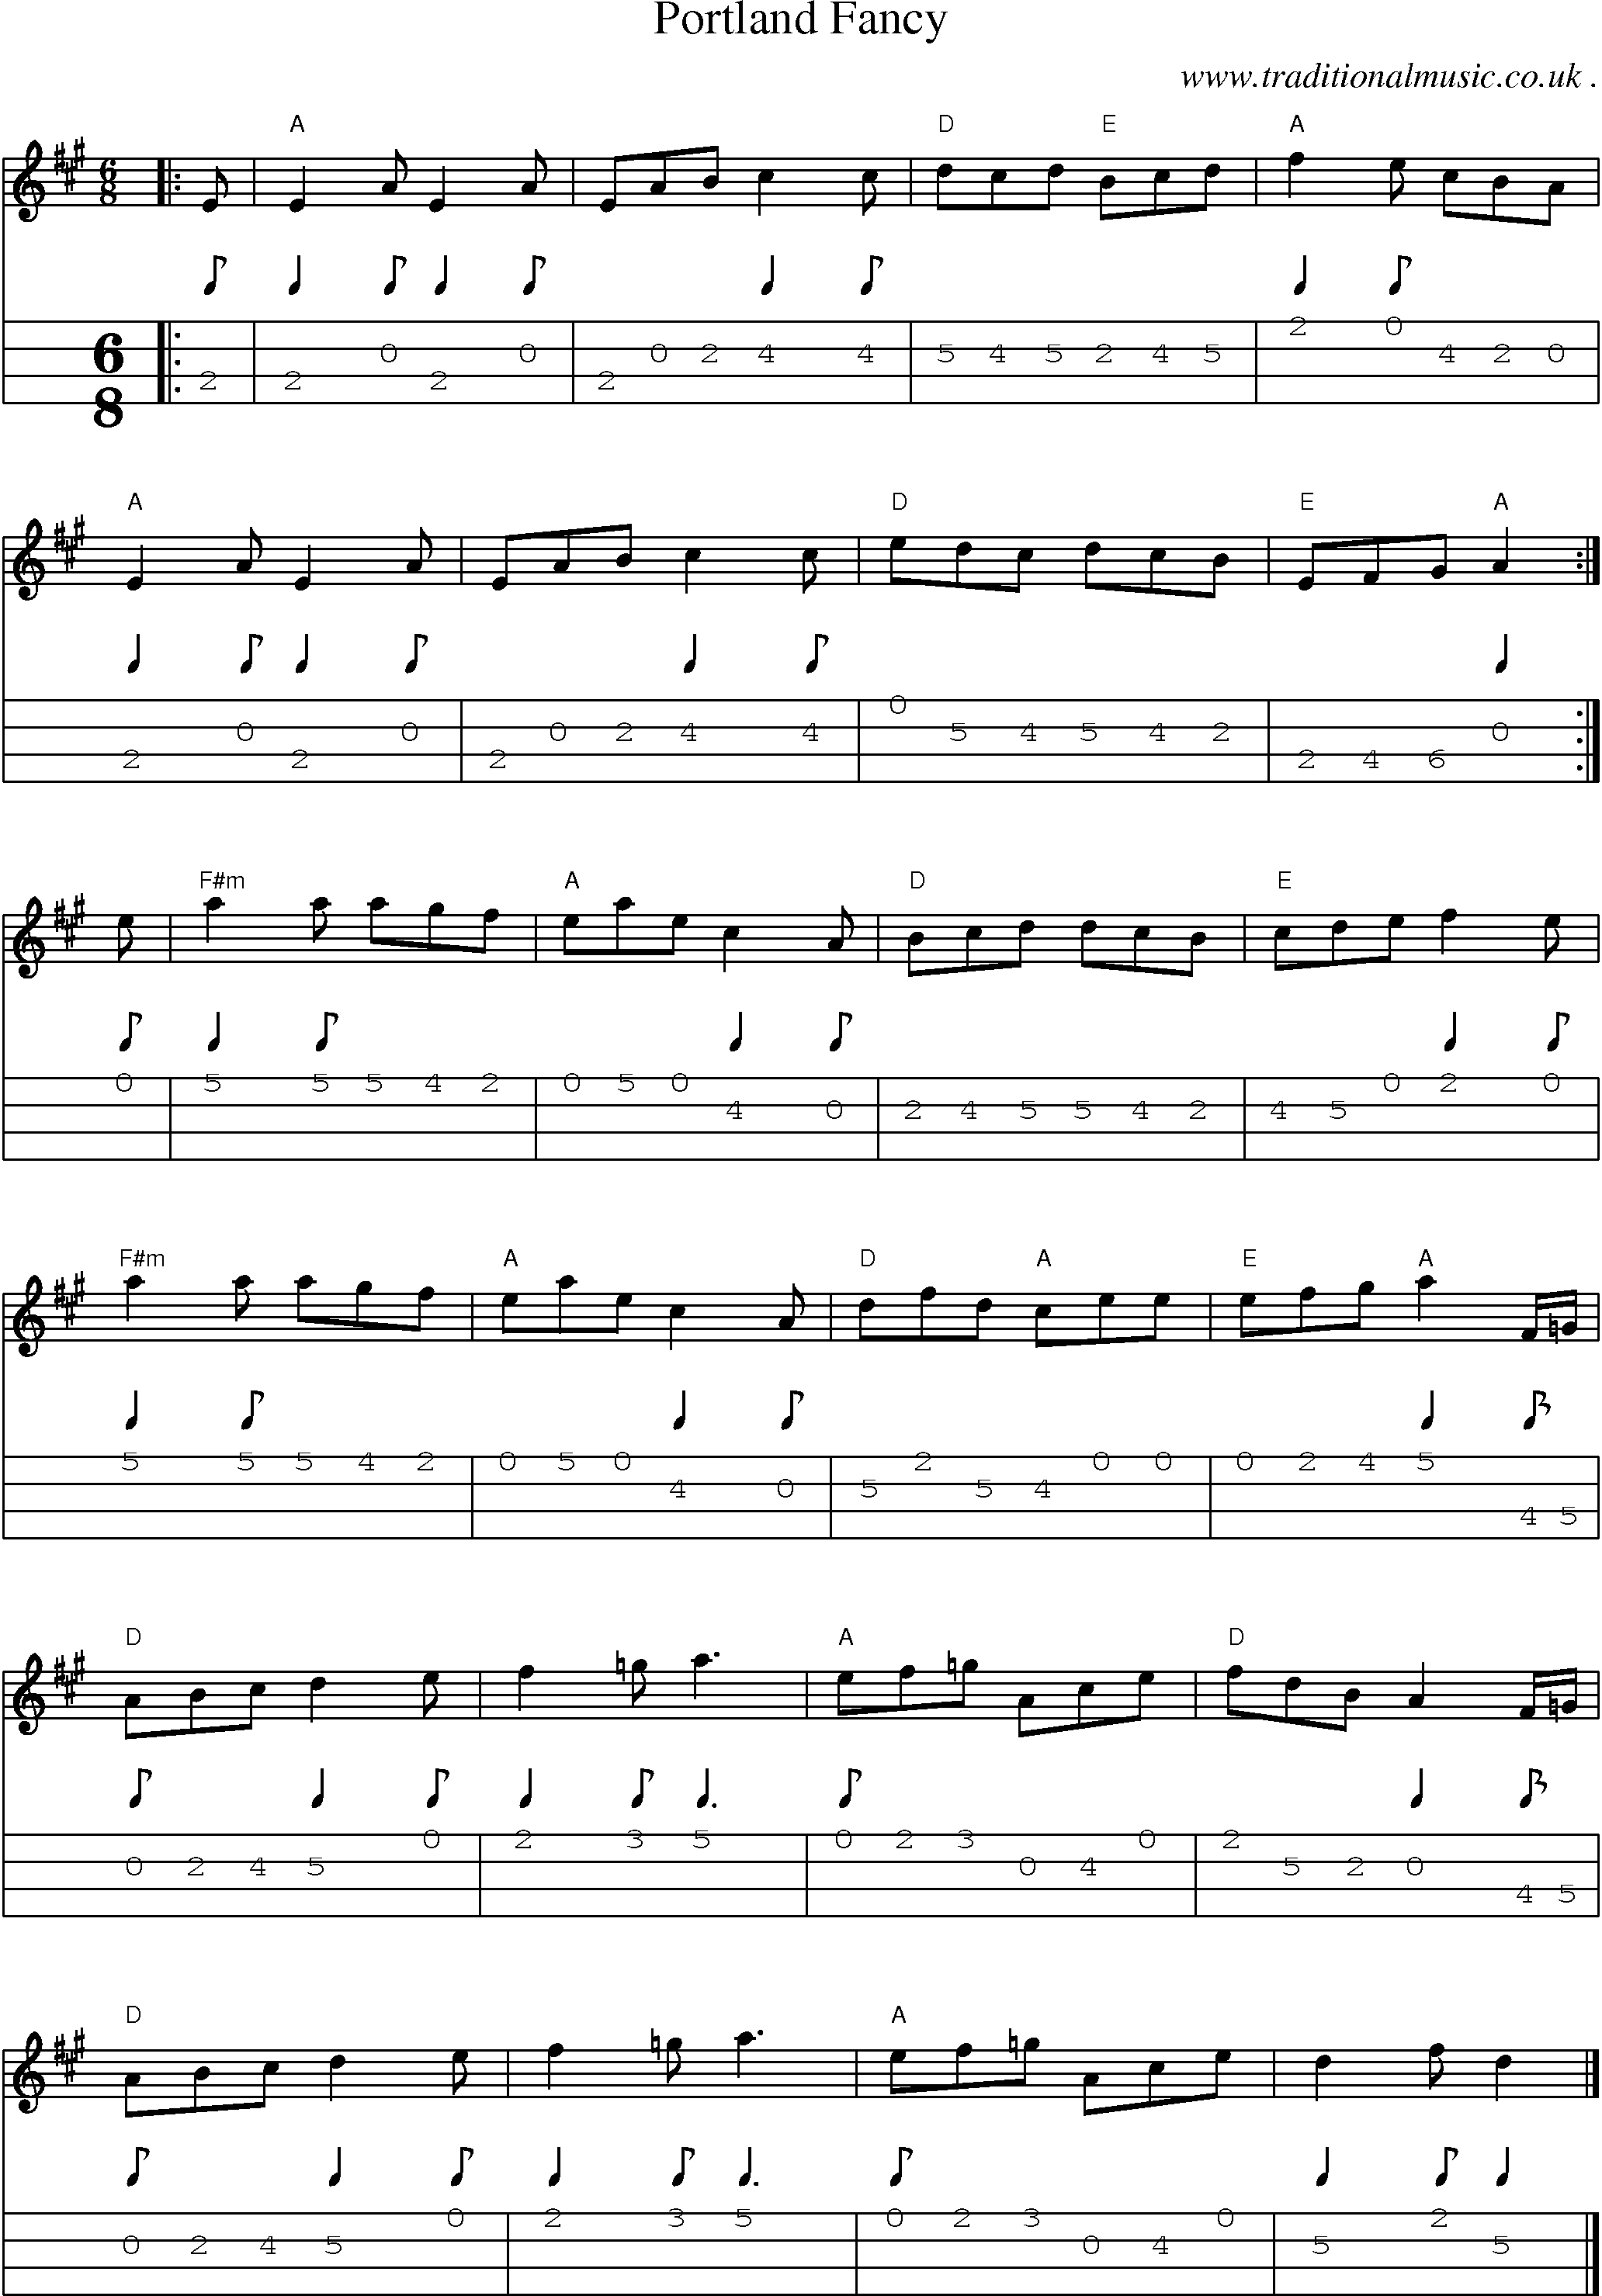 Music Score and Guitar Tabs for Portland Fancy